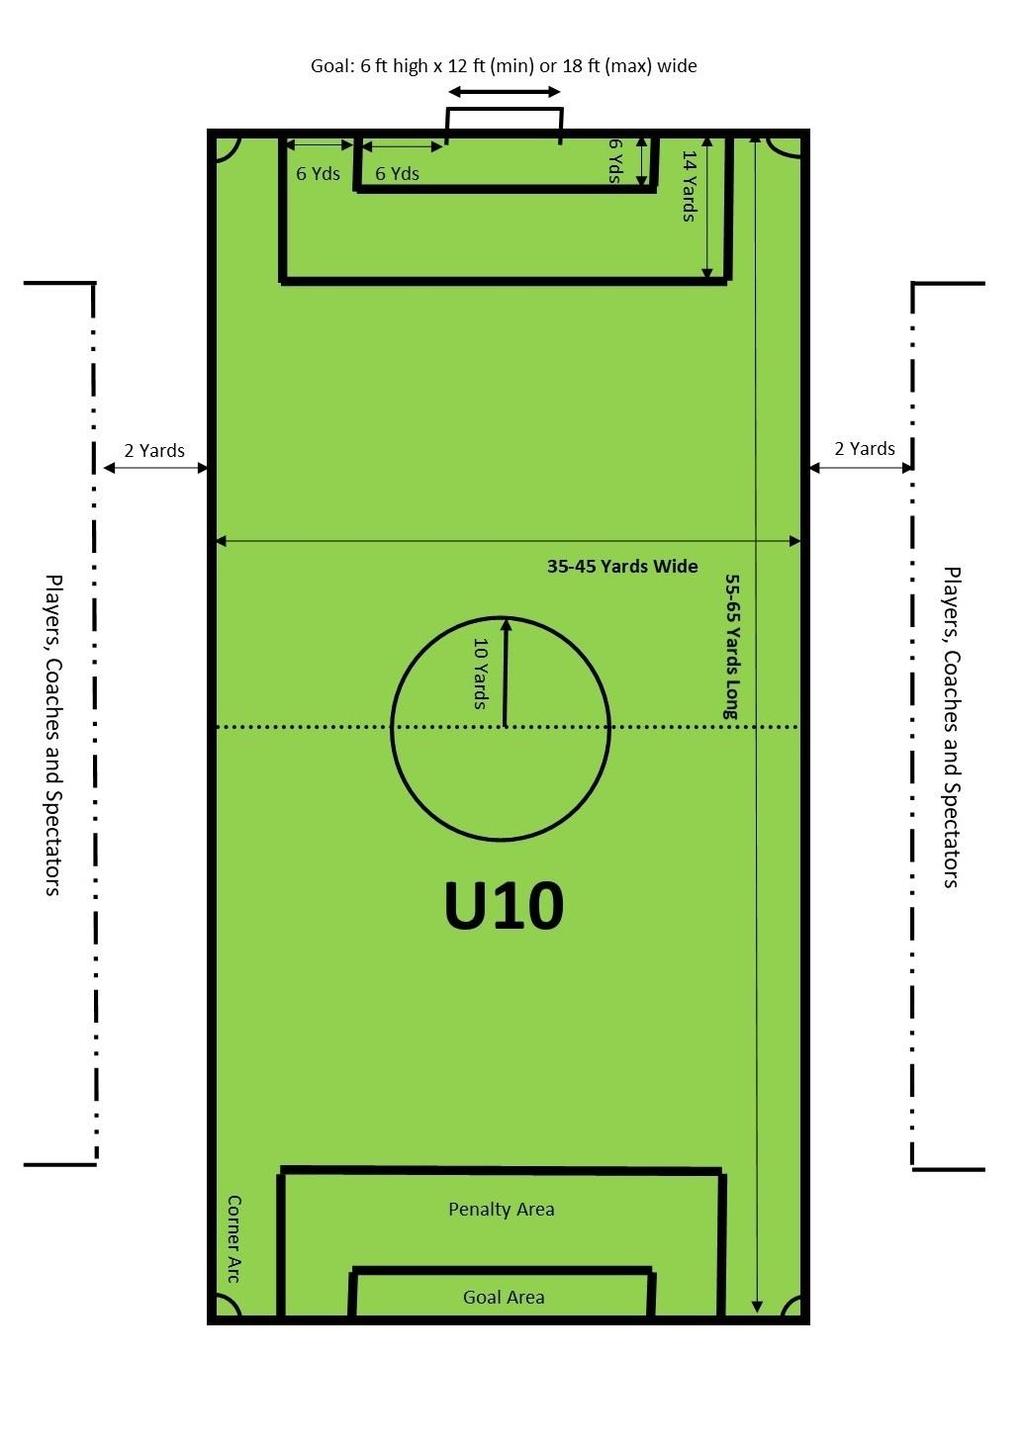 Small-Sided Field